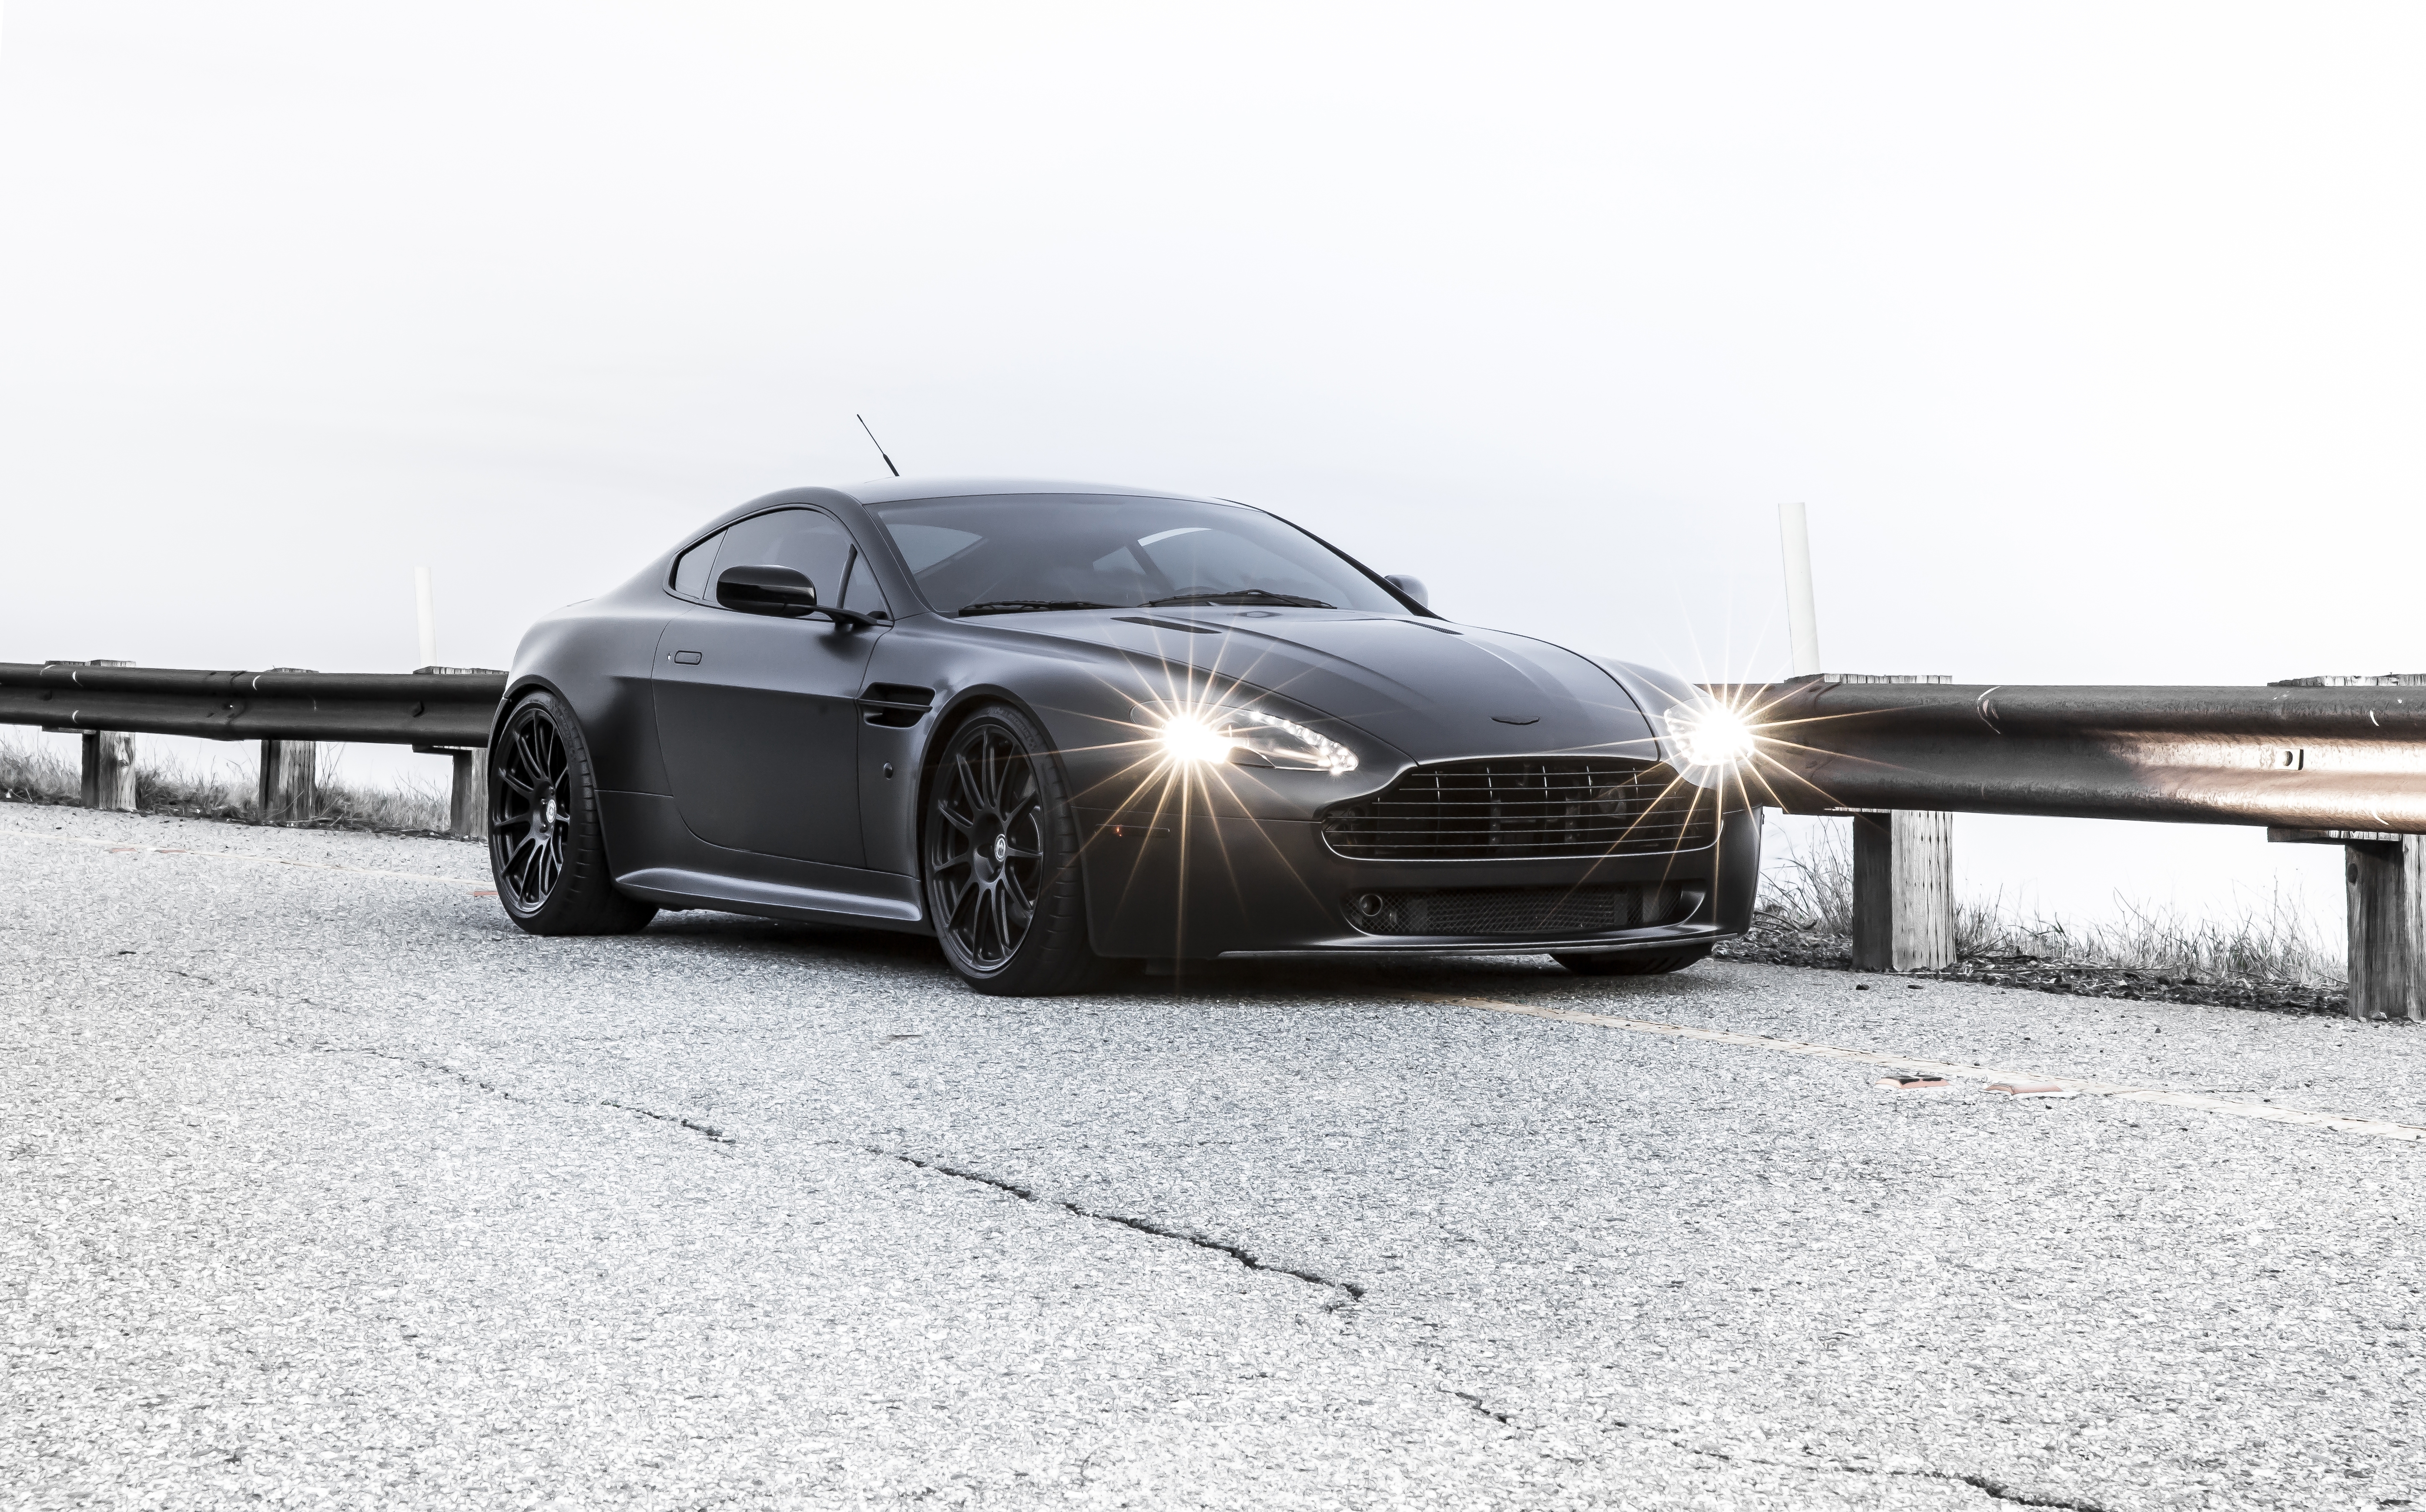 51899 download wallpaper aston martin, cars, black, vantage, bump stop, the screensavers and pictures for free